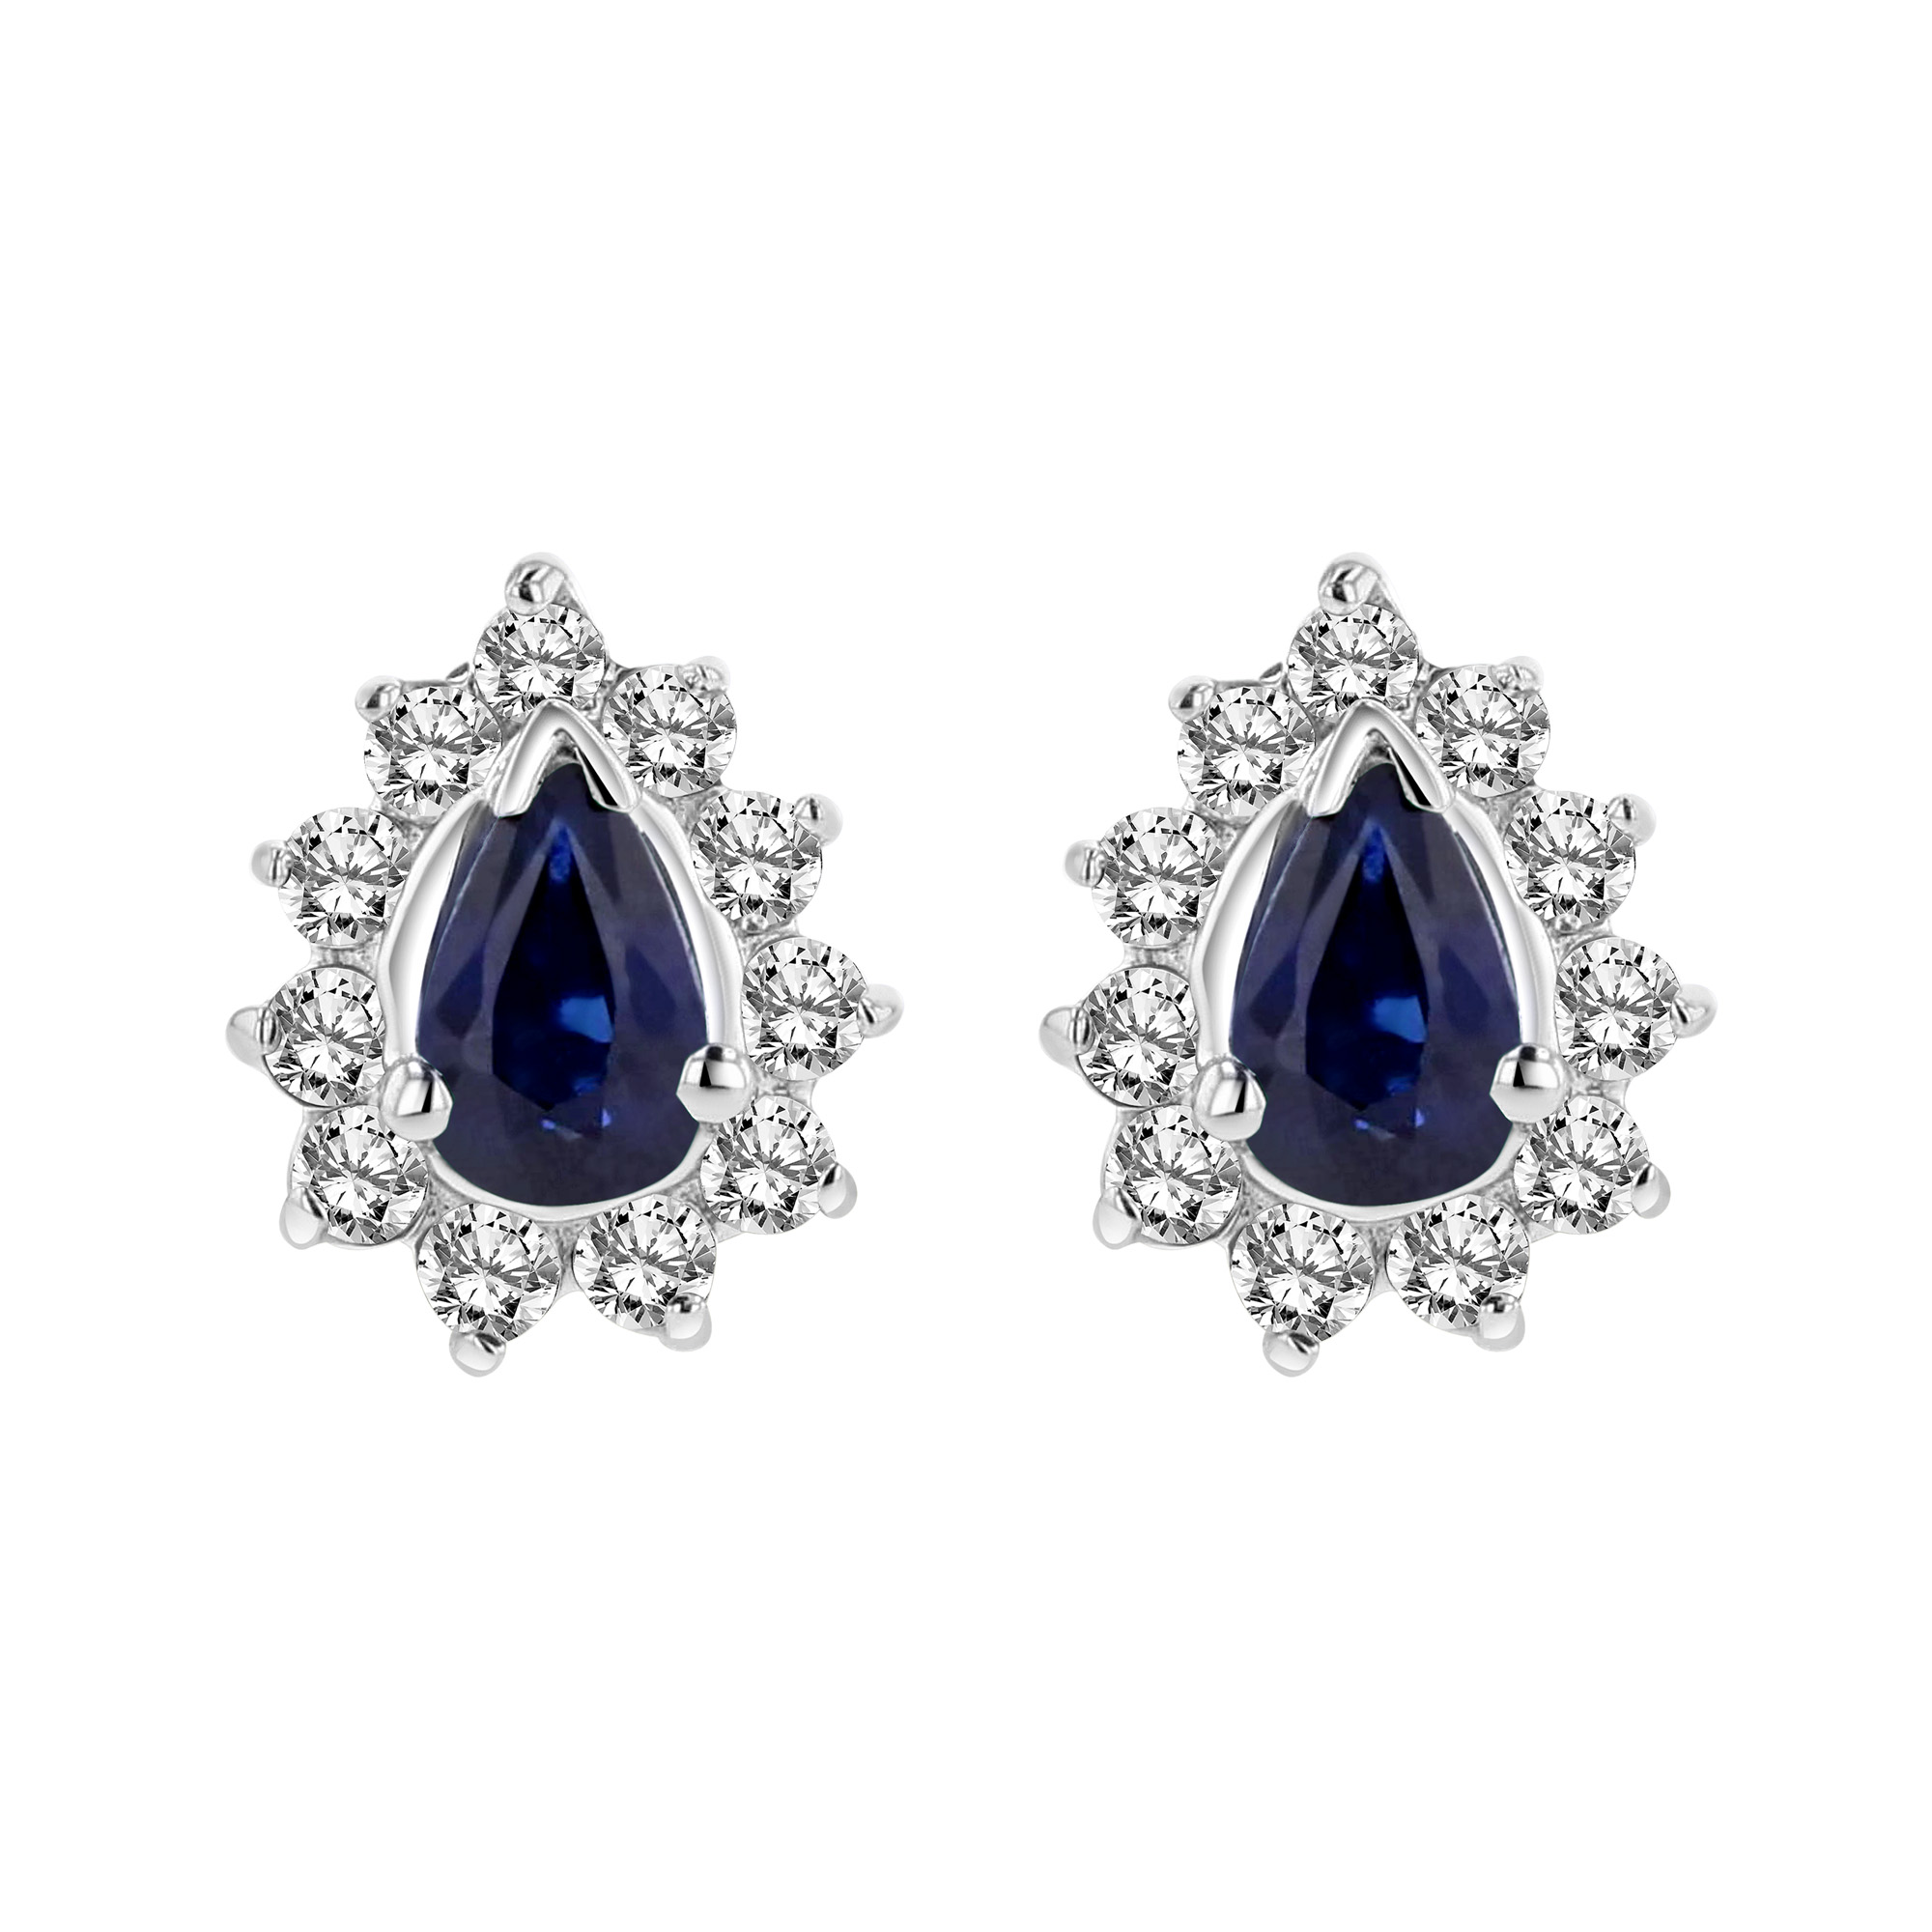 View 0.80cttw Diamond and Sapphire Earring in 14k Gold